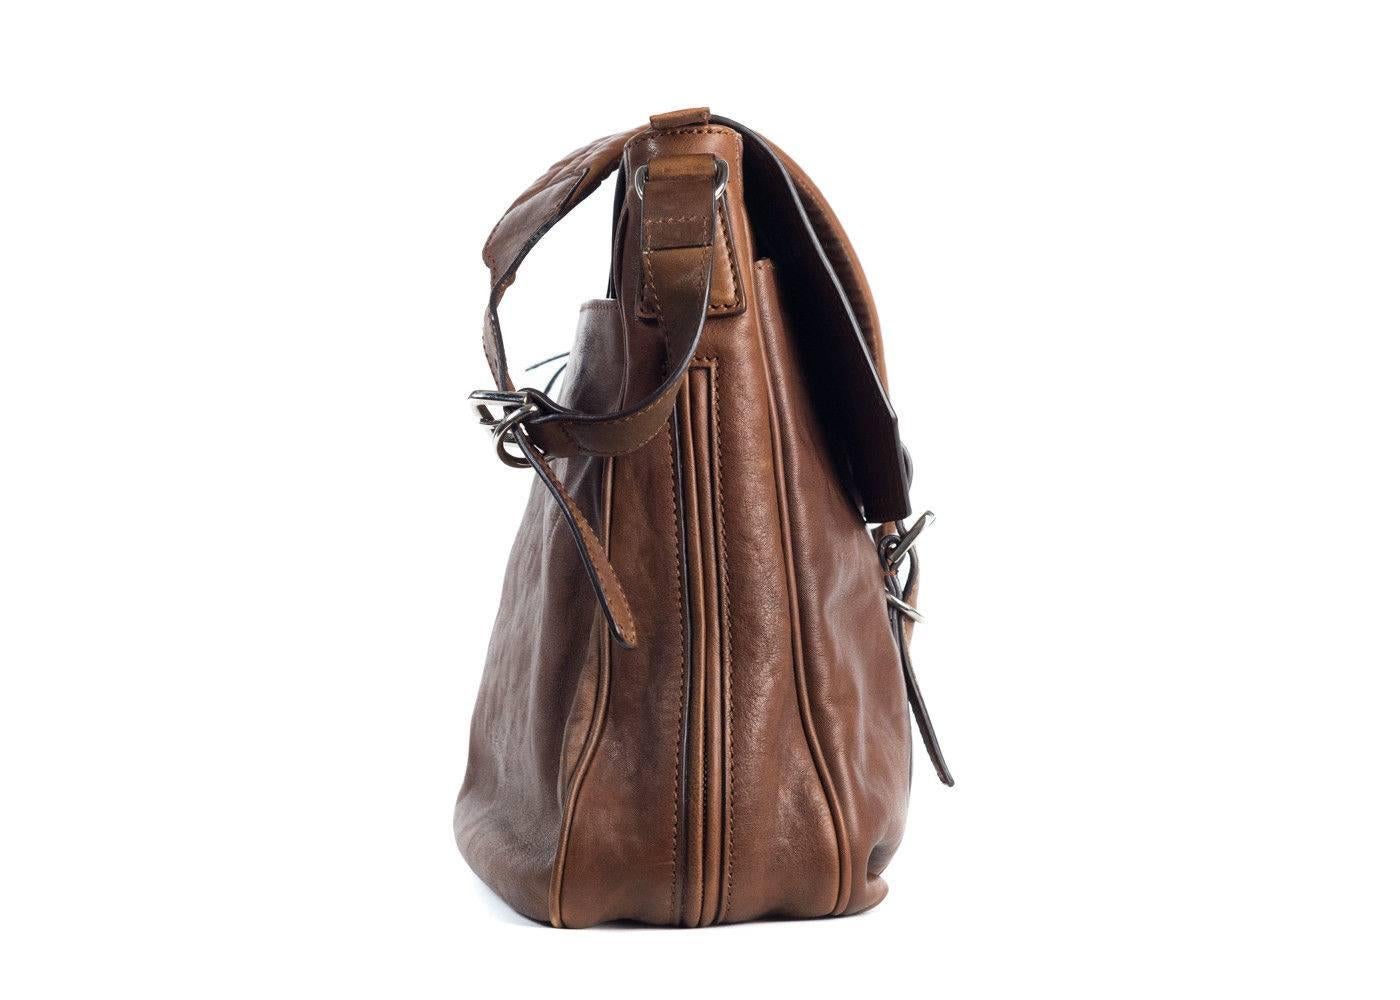 Brand New Brunello Cucinelli Messenger Bag
Dust Bag Included
Retails in Stores & Online for $3495
Dimensions: 15